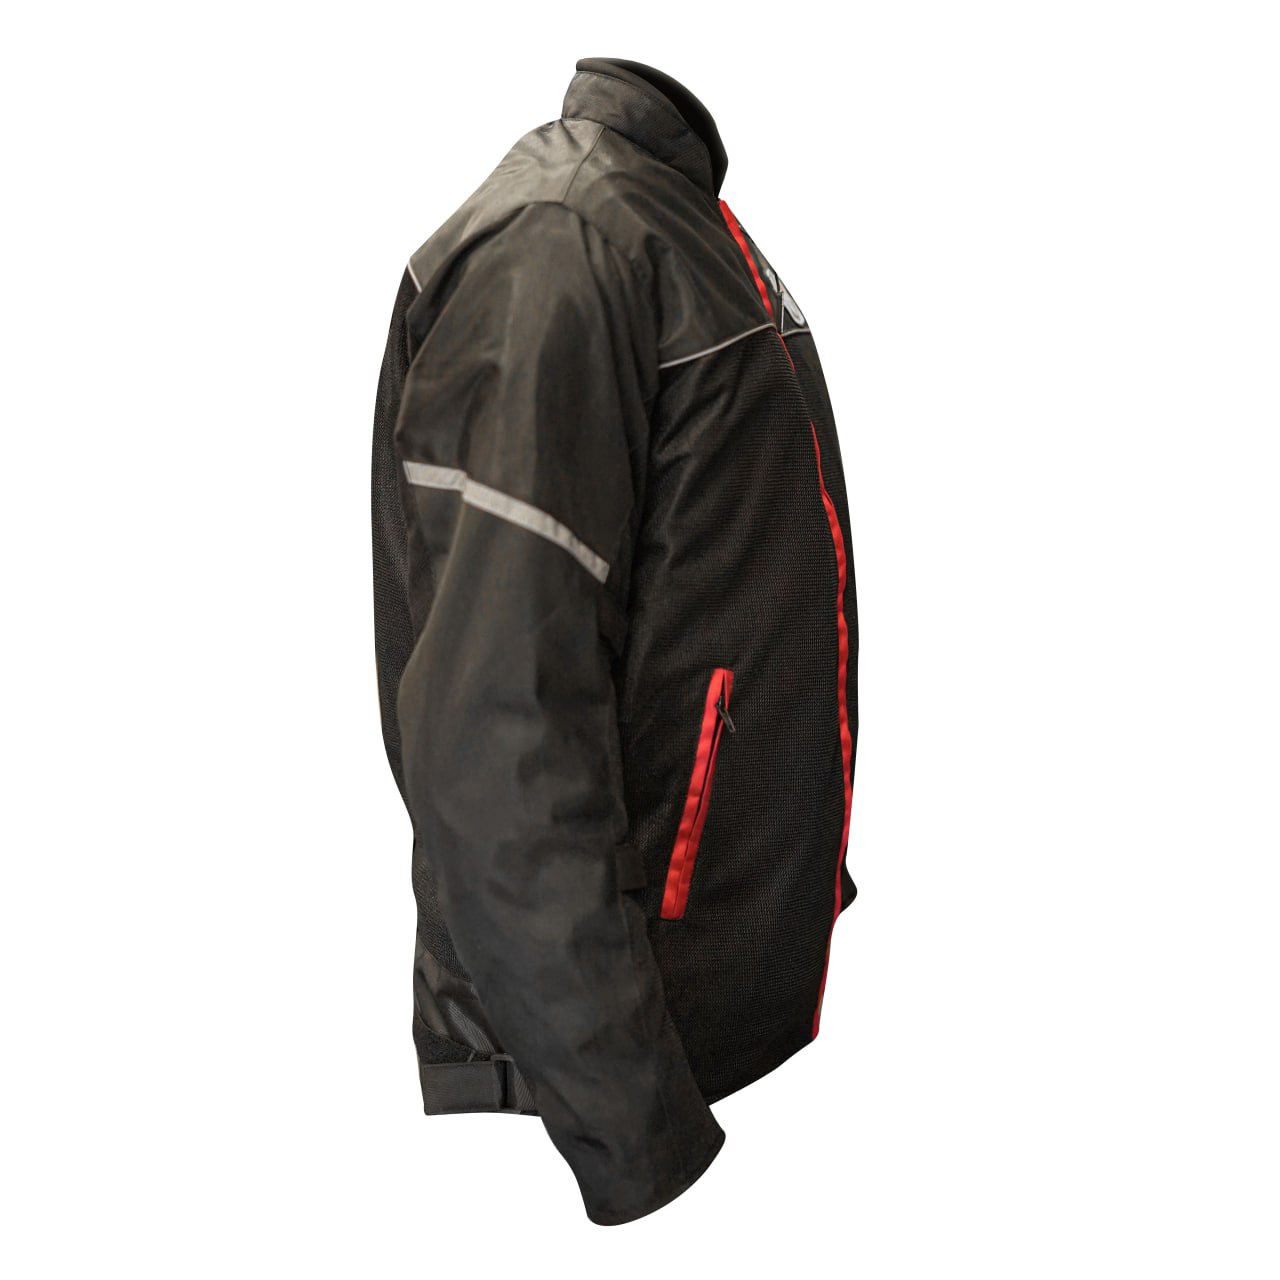 Riding Jacket For Men Resistor Neon RES N L2 in Bangalore at best price by  Moto Torque India - Justdial